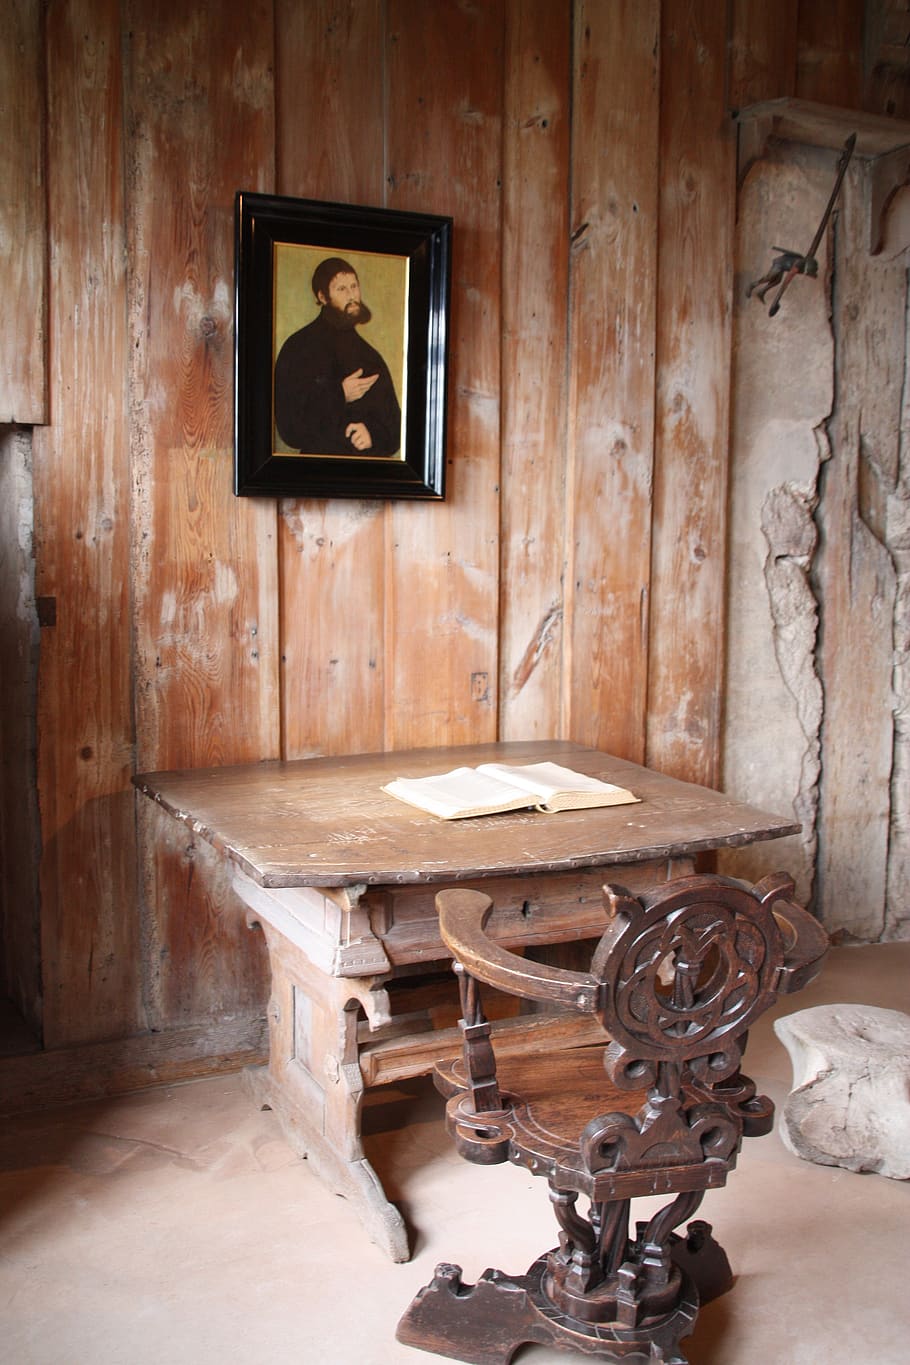 martin luther, reformation, wartburg castle, eisenach, religion, indoors, wood - material, old, architecture, table